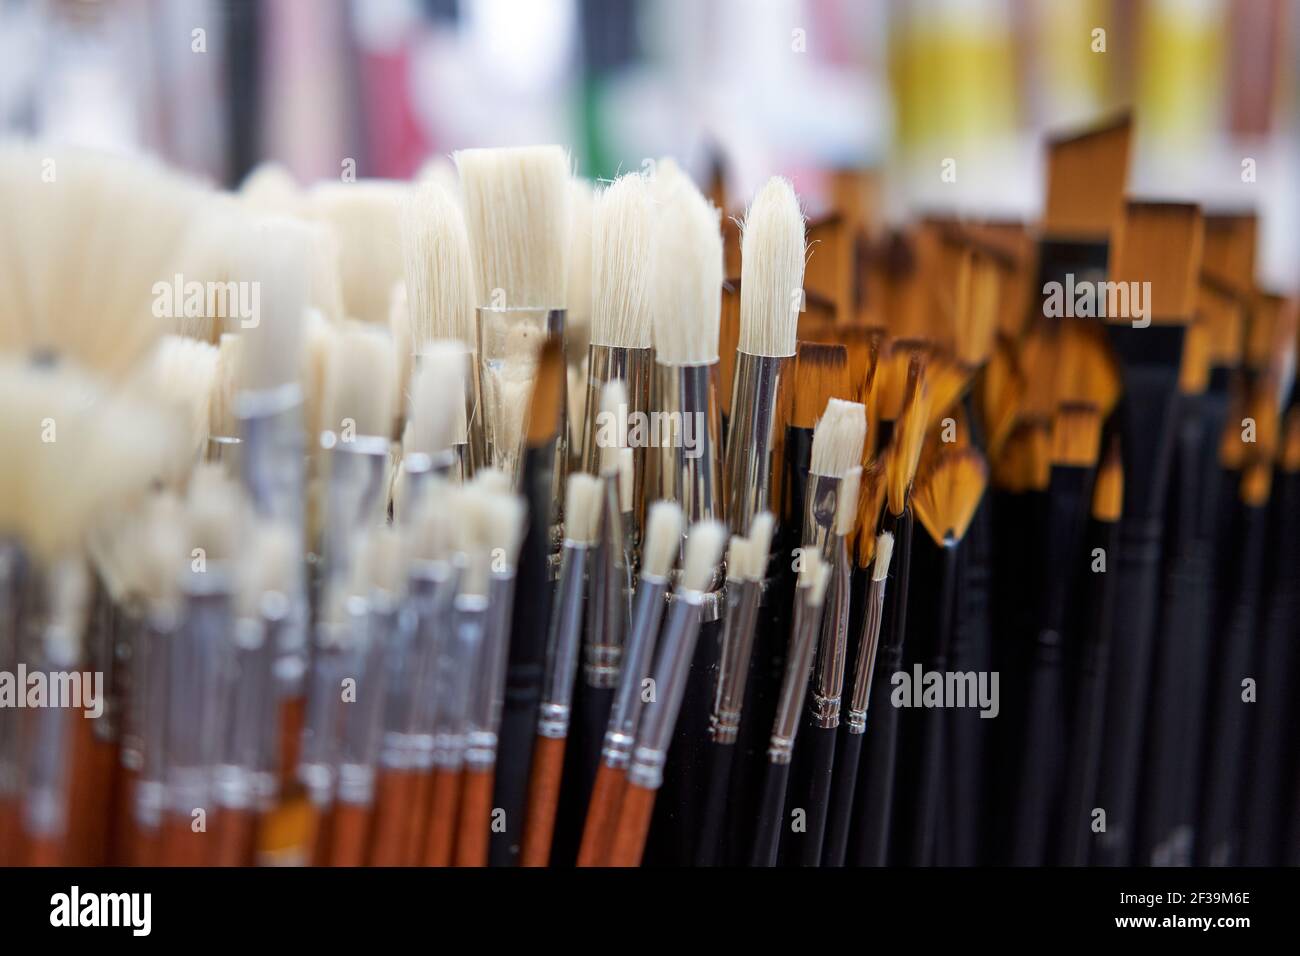 Group artistic paintbrushes for artist New paint brushes on shelf display in stationery shop. Art painting concept. Concept selling tools for artists Stock Photo